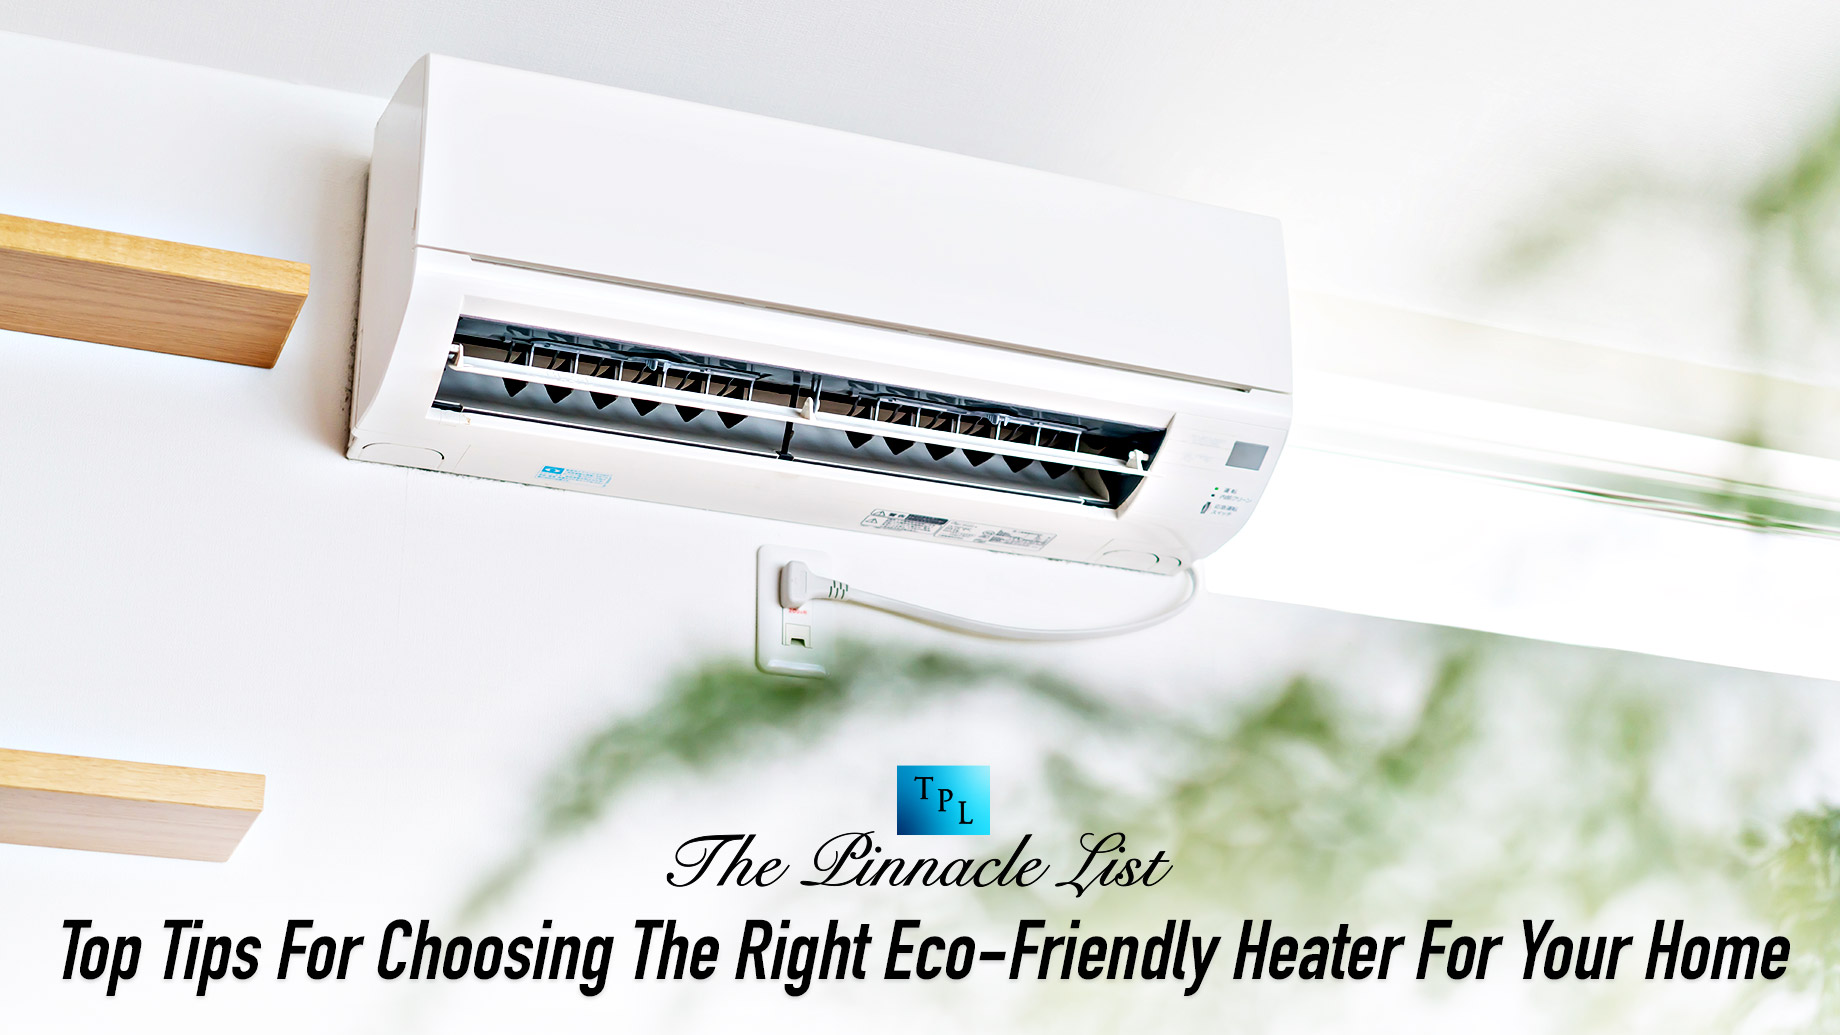 Top Tips For Choosing The Right Eco-Friendly Heater For Your Home